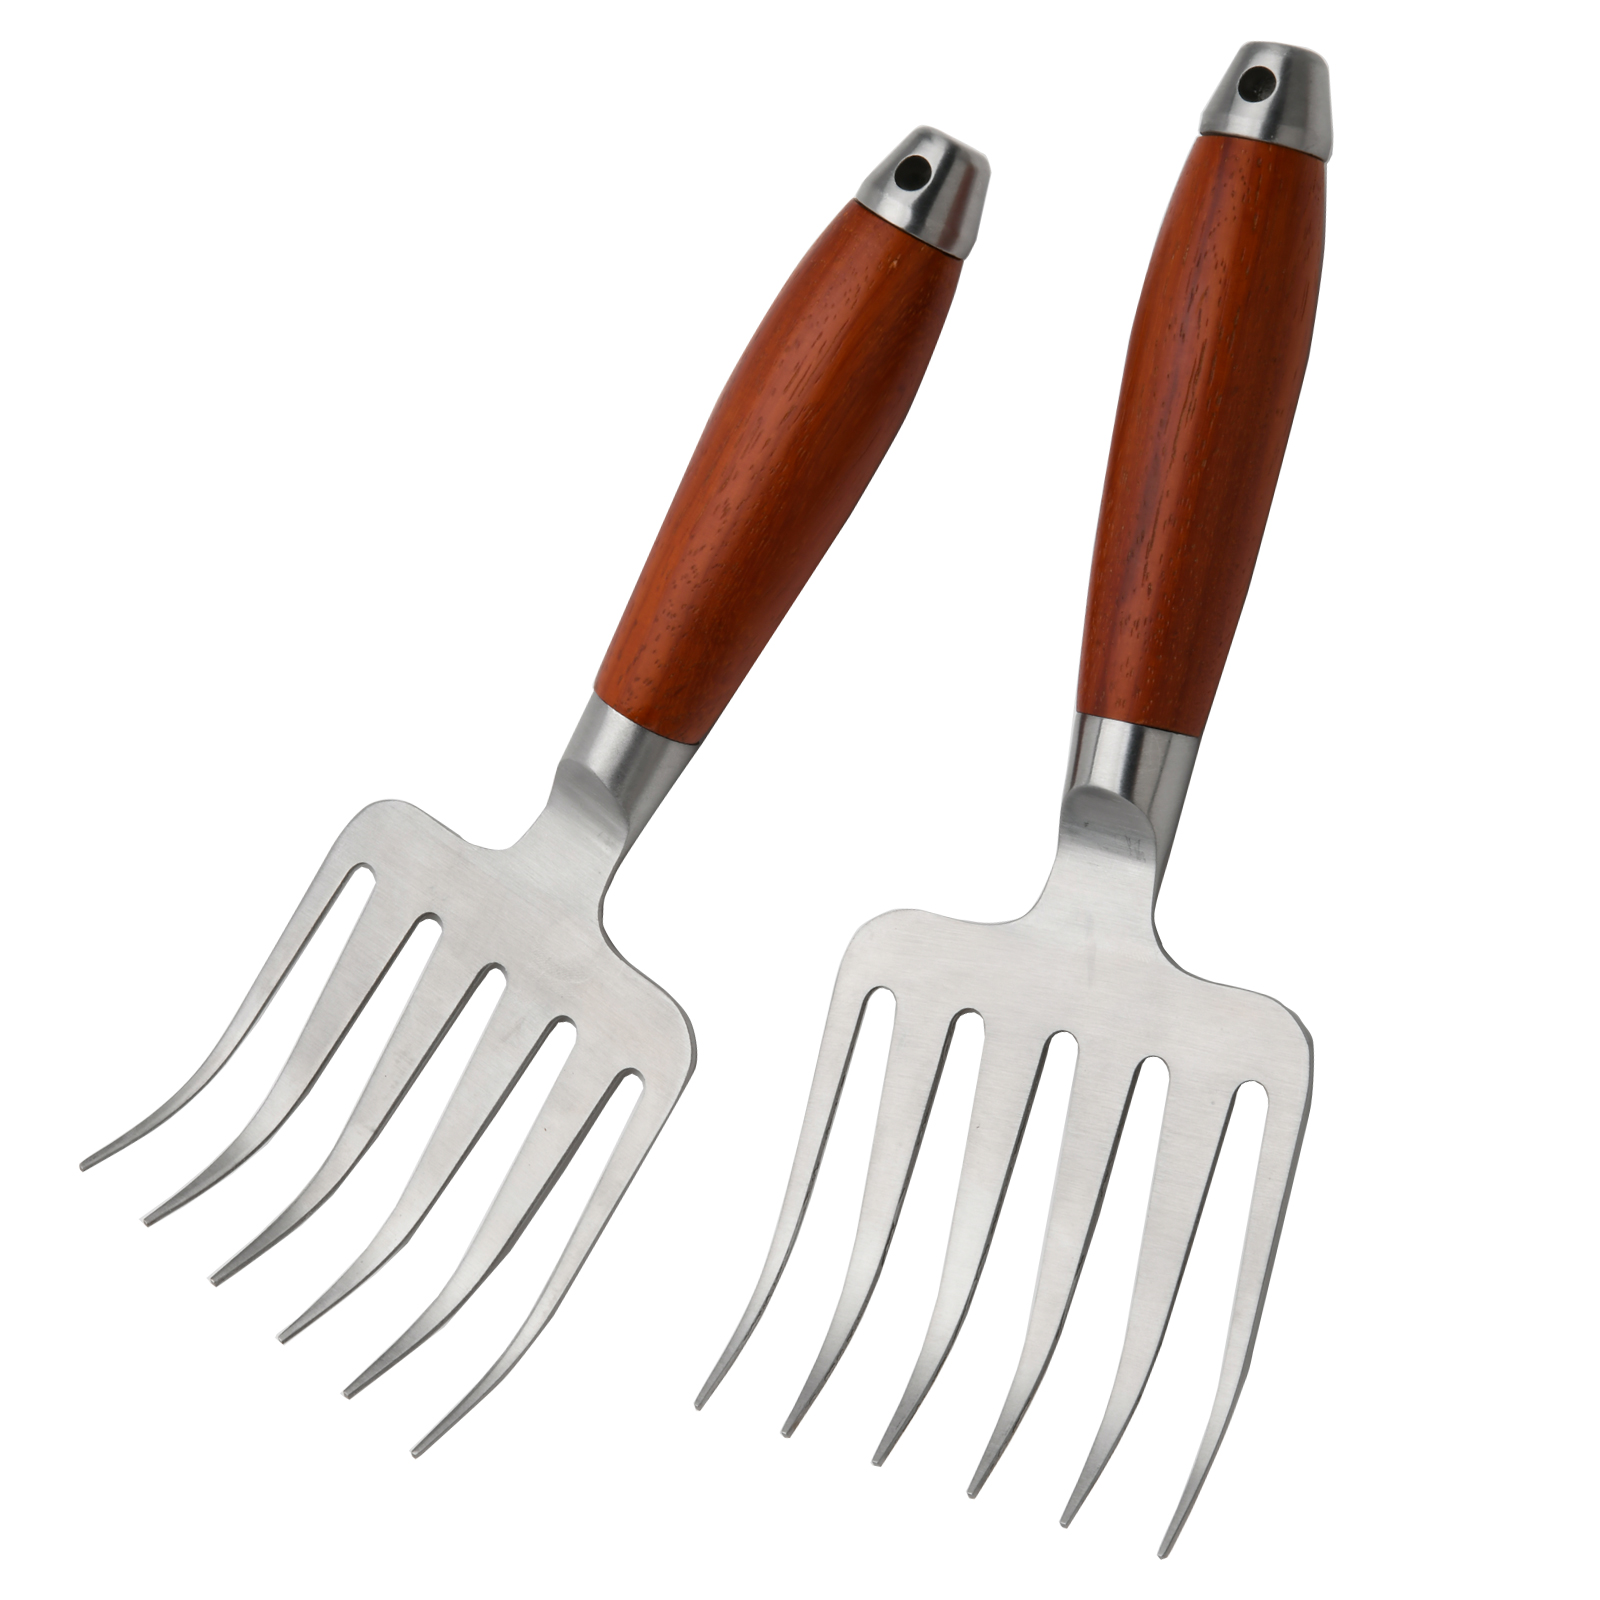 Meat Shredder Claws Kit - Set of 2 at Penn State Industries